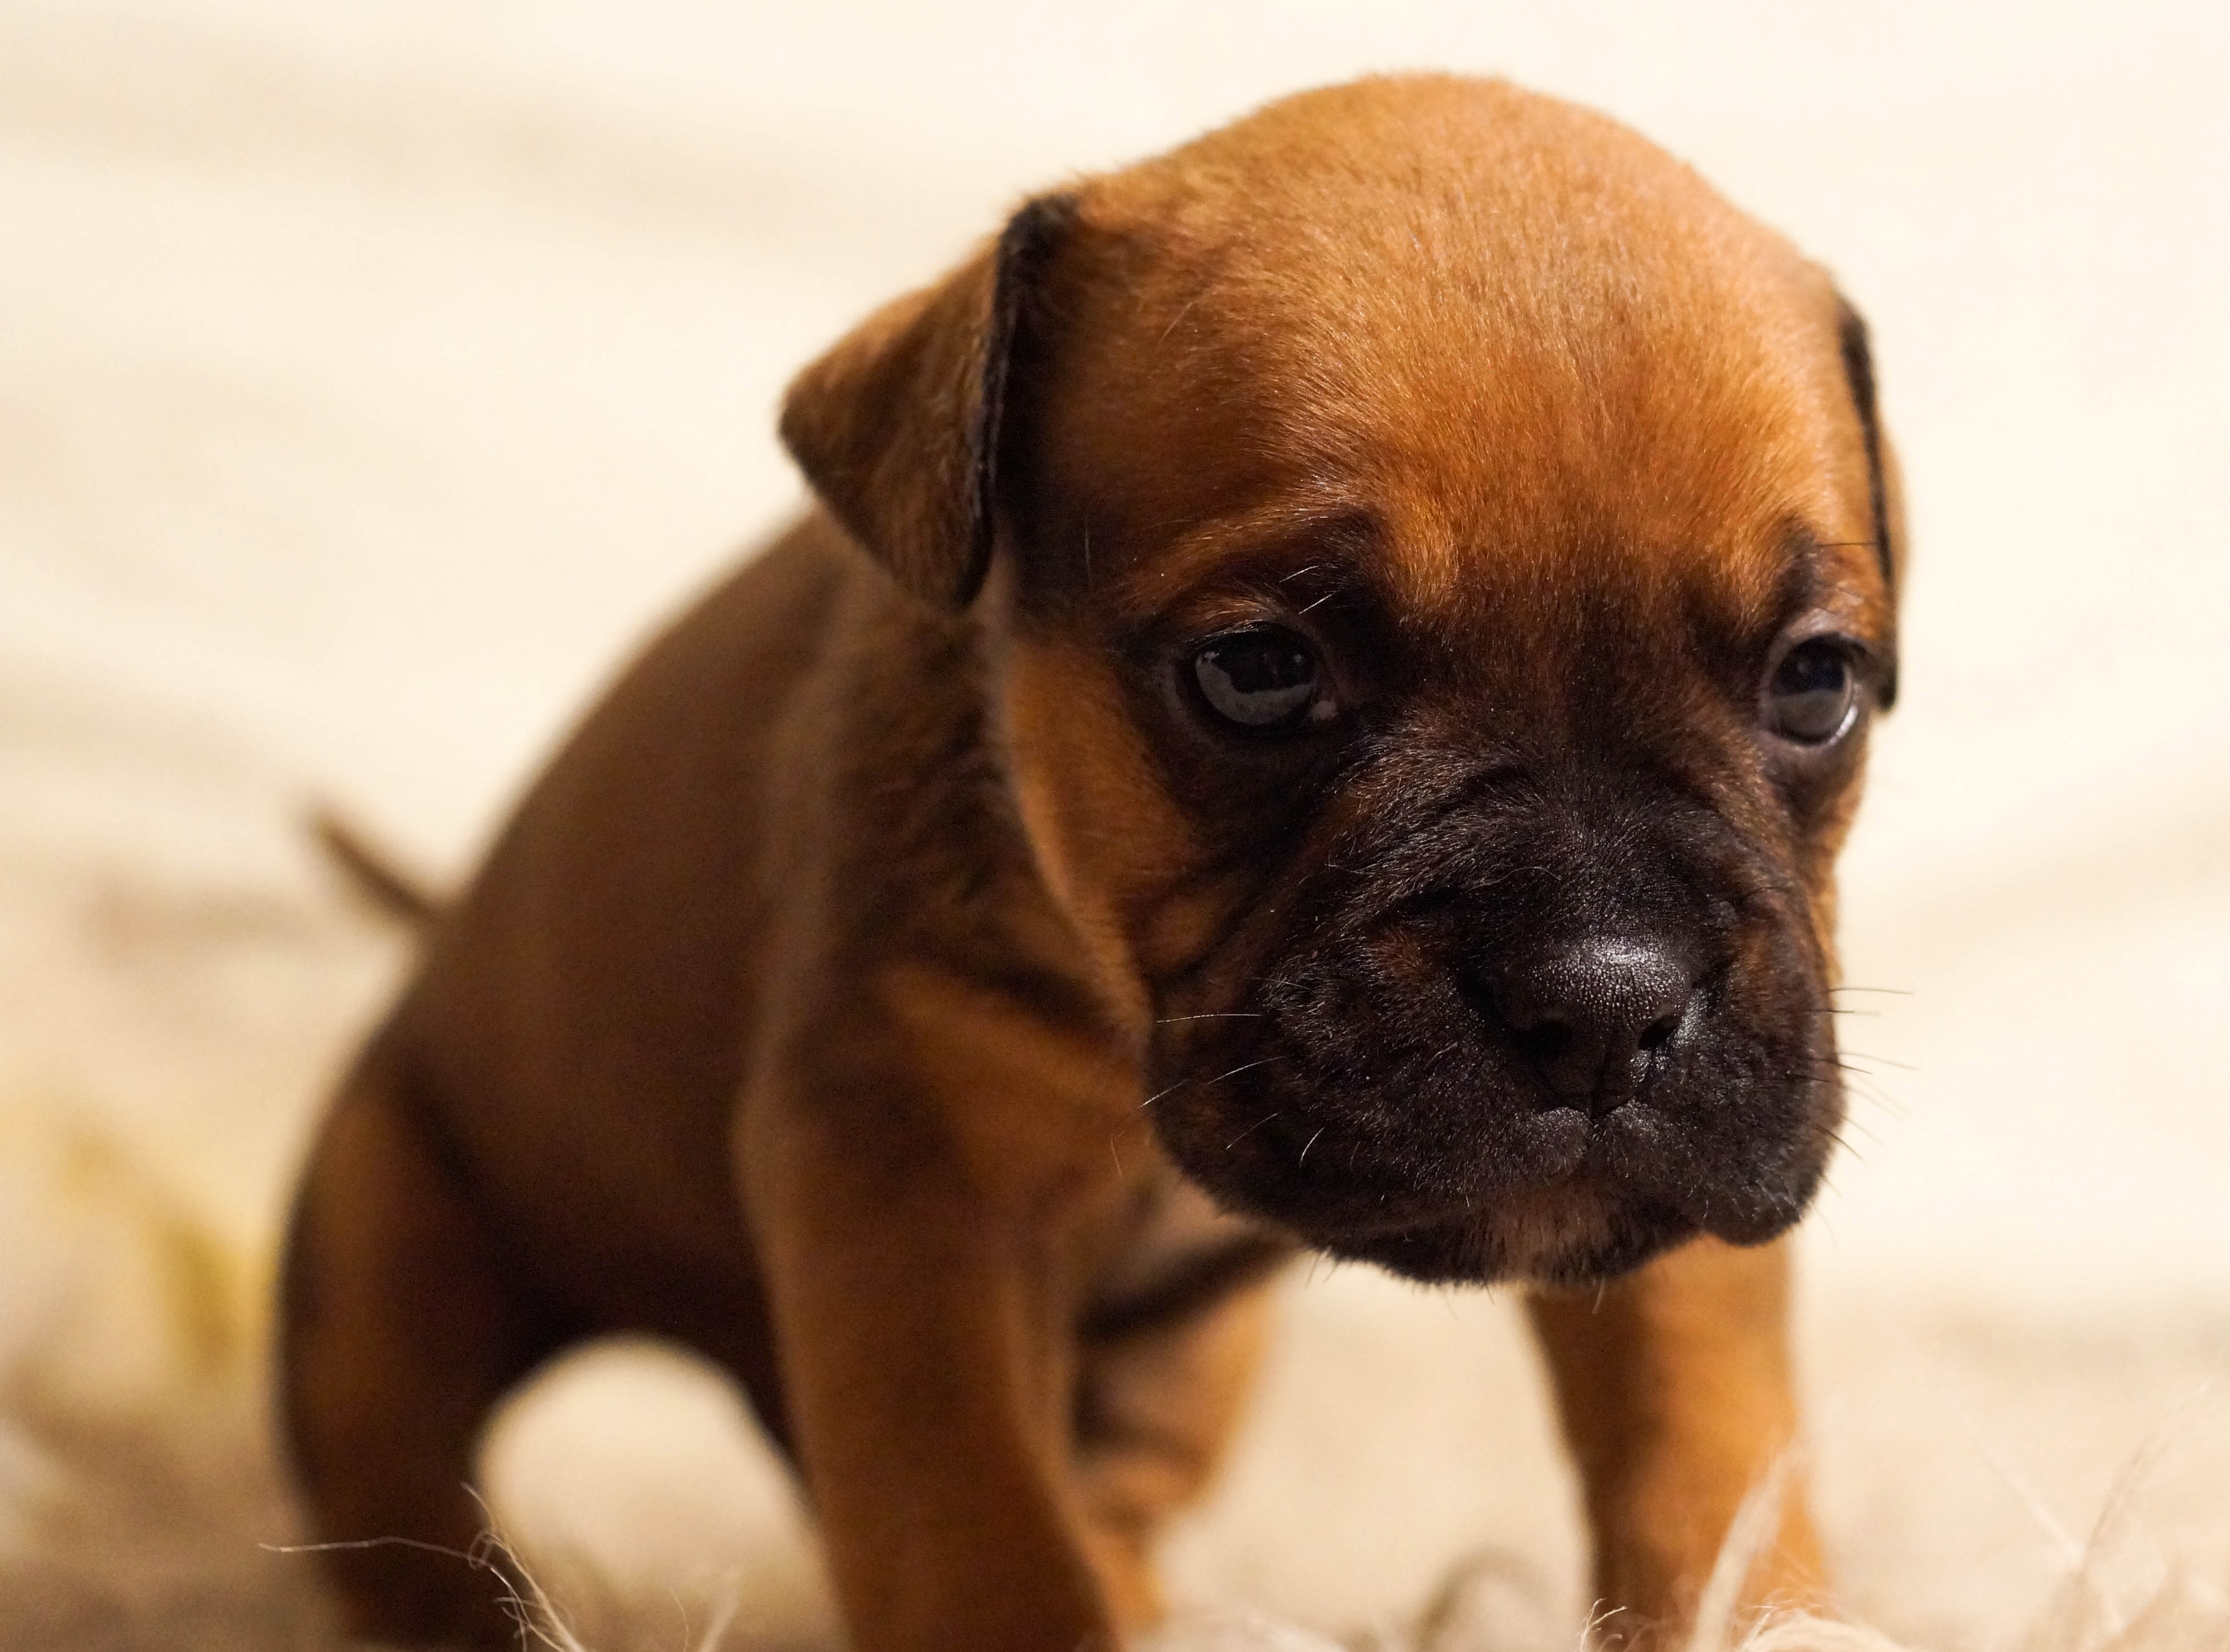 Can Dogs Cry Tears Like Humans? (Interesting Fact)